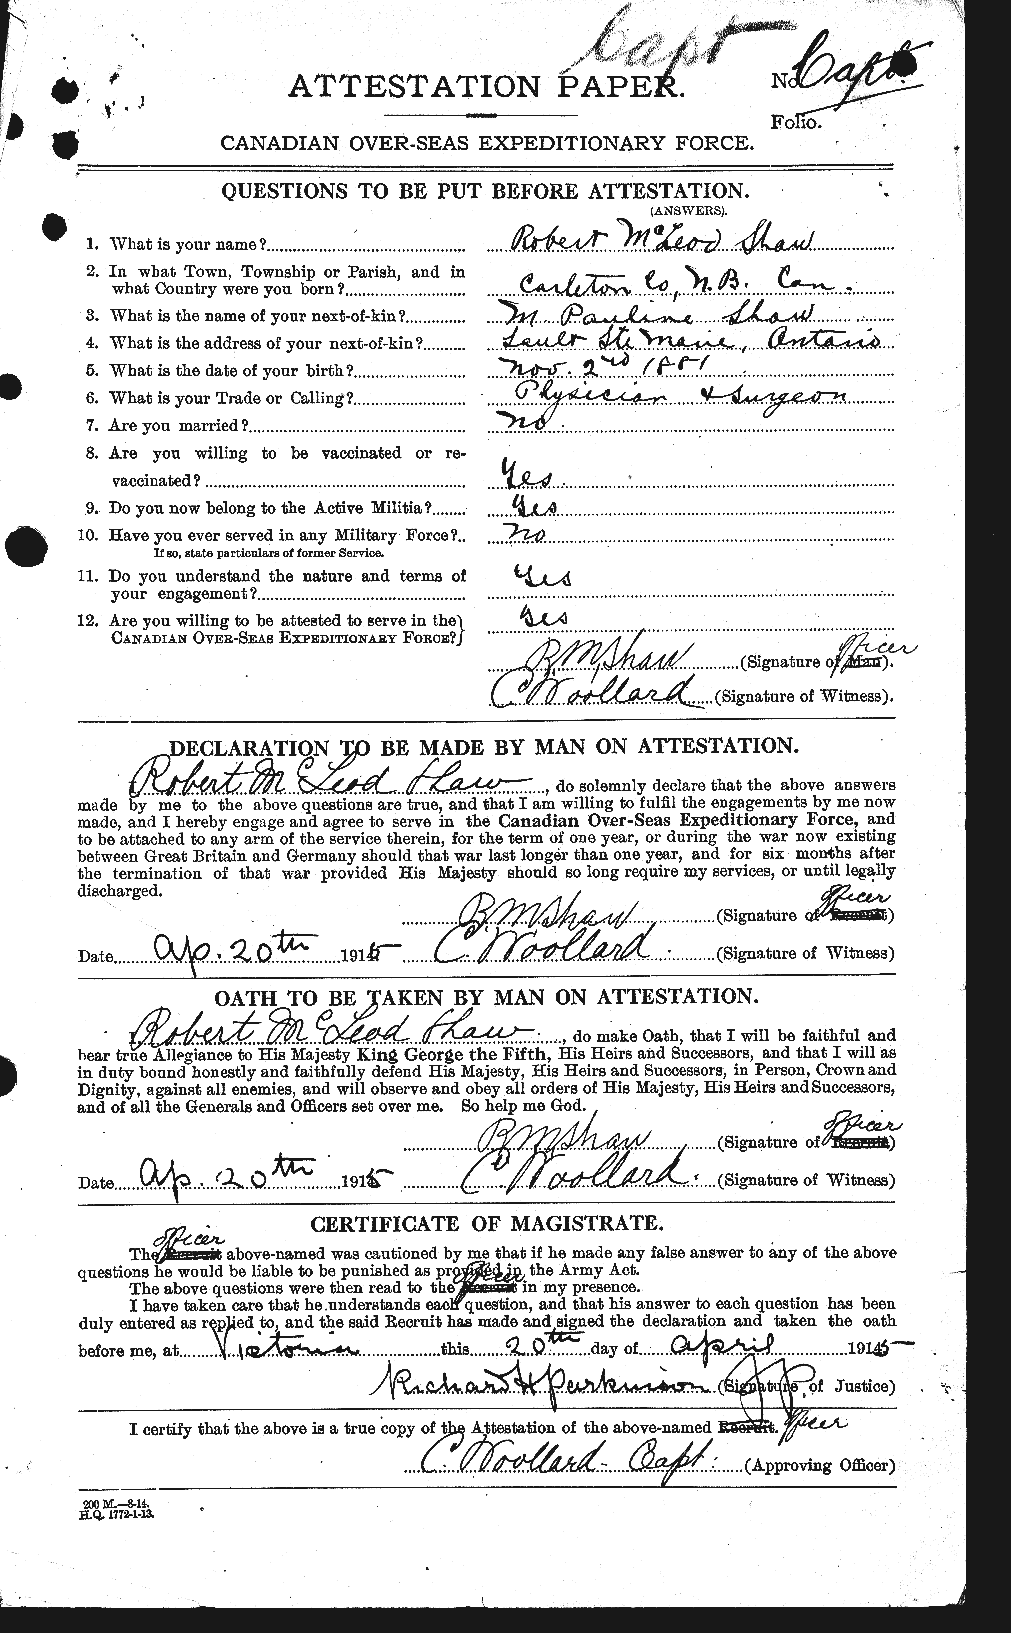 Personnel Records of the First World War - CEF 089832a